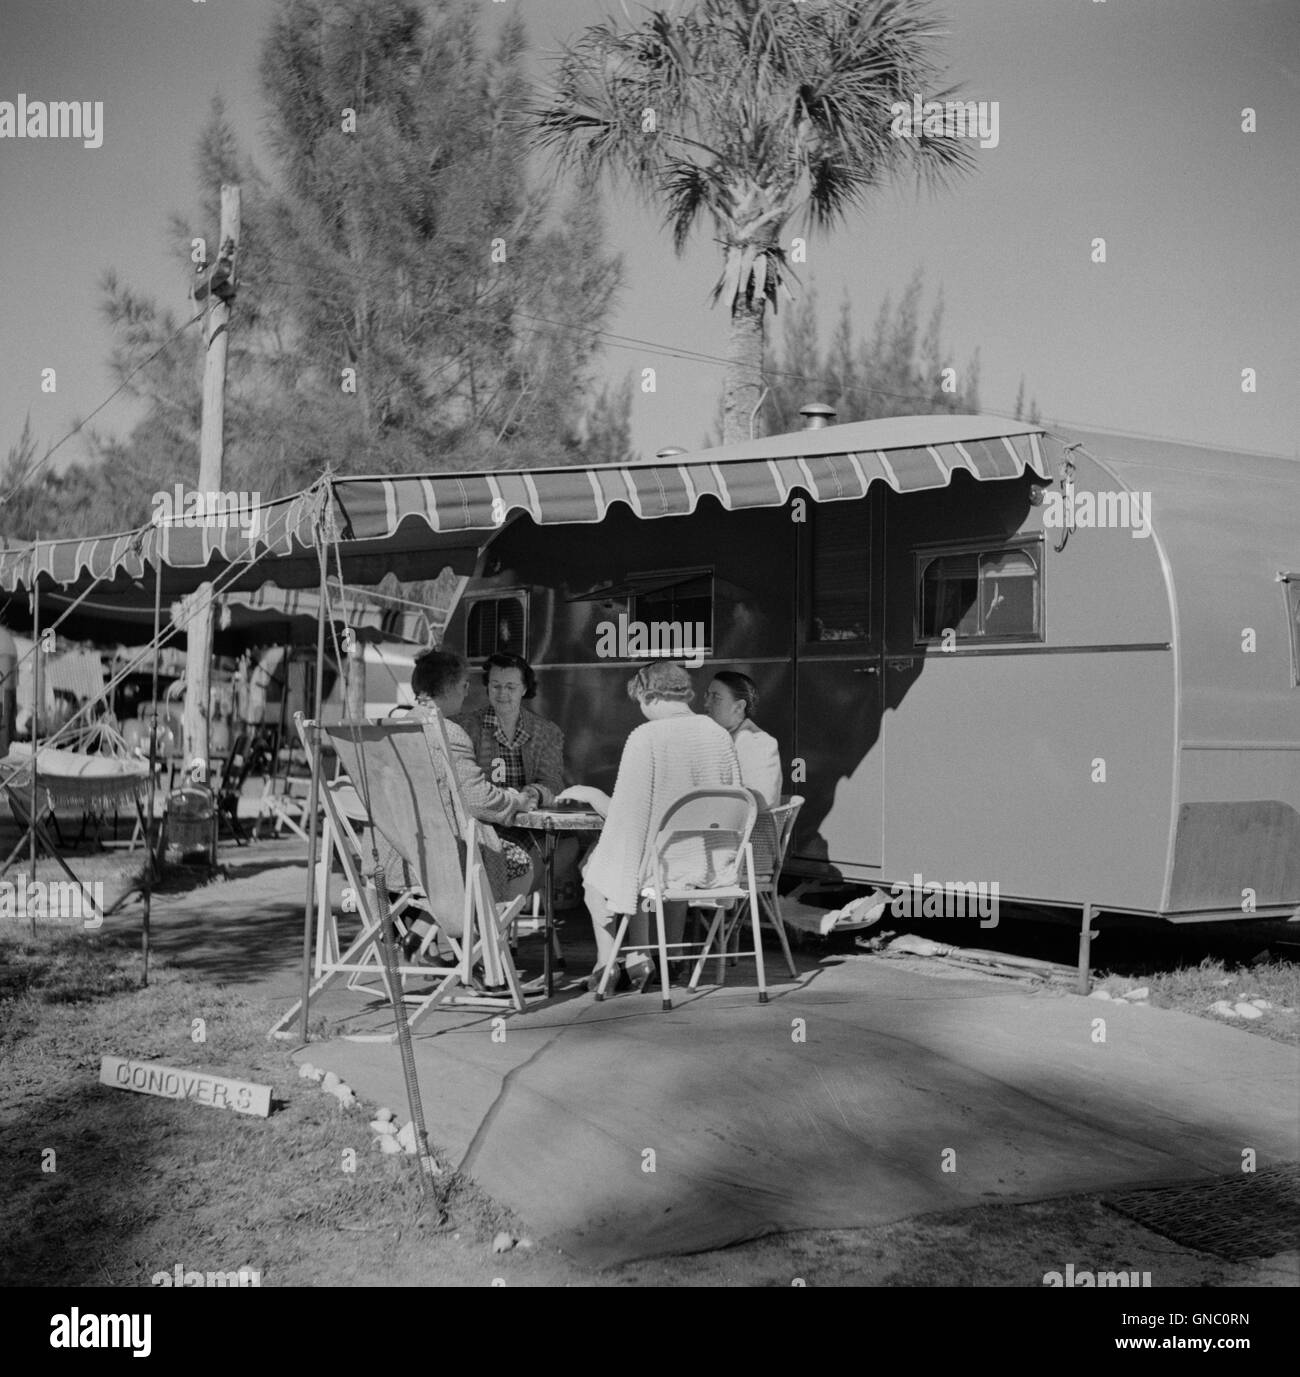 Women Playing Cards on Porch of Trailer Home, Sarasota, Florida, USA, Marion Post Wolcott, U.S. Farm Security Administration, January 1941 Stock Photo